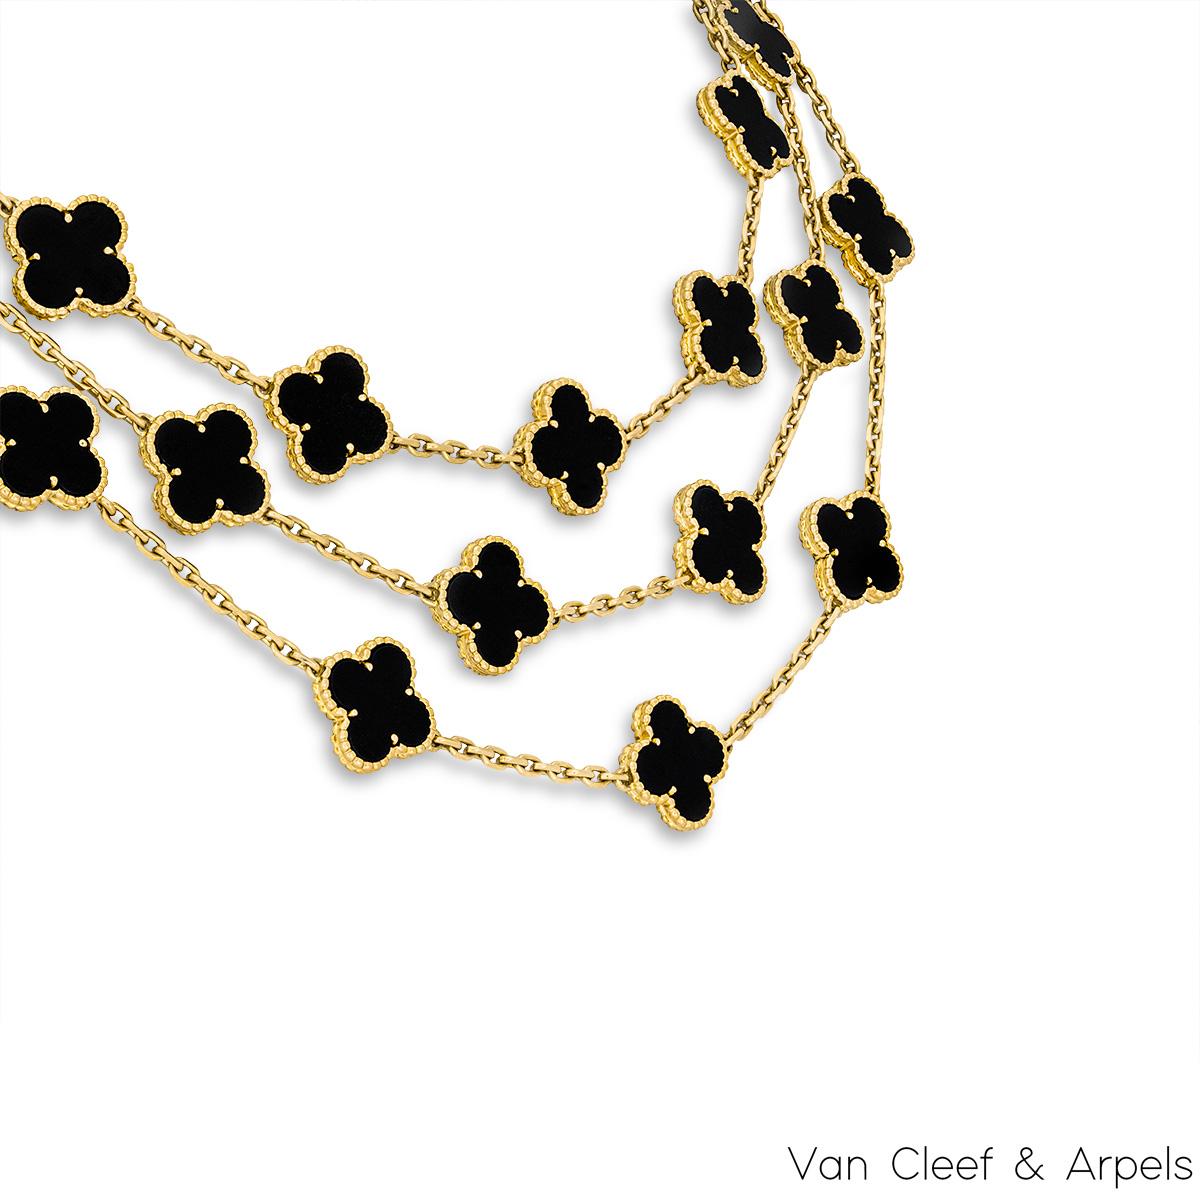 An iconic 18k yellow gold necklace by Van Cleef & Arpels from the Vintage Alhambra collection. The necklace features 29 iconic 4 leaf clover motifs, each set with a beaded edge and a onyx inlay, set throughout the length of the chain on 3 different